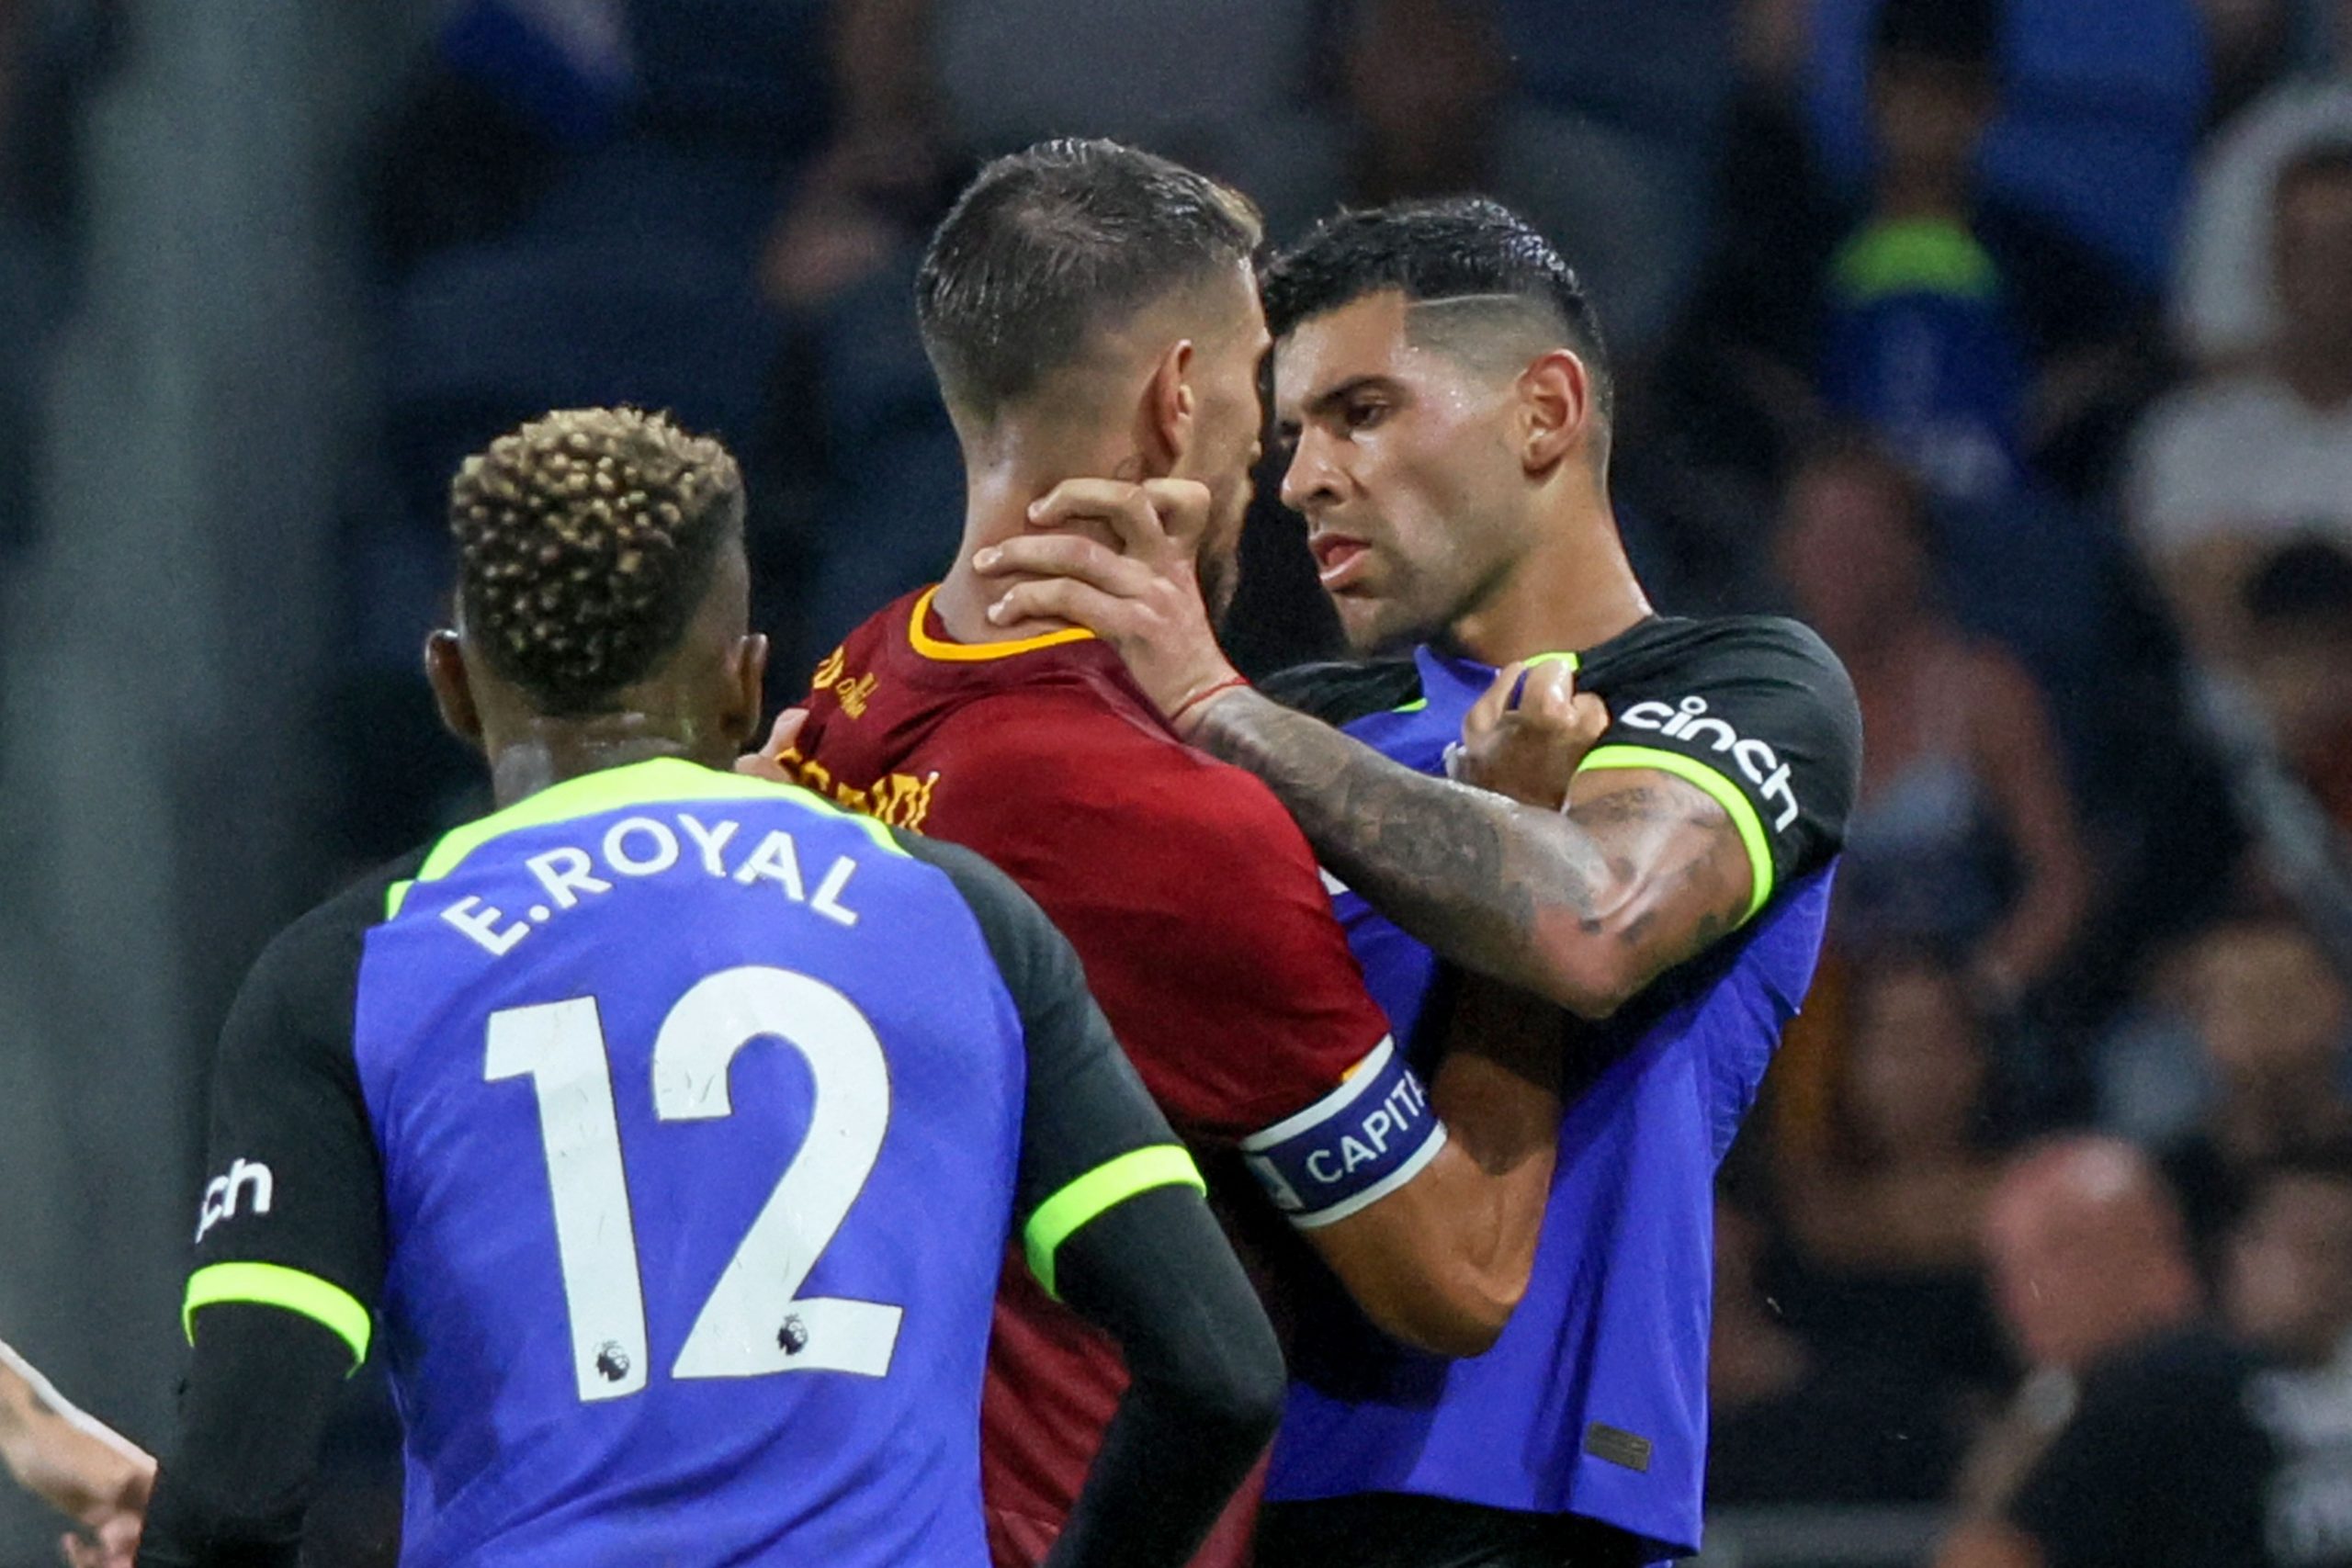 Nicolo Zaniolo of AS Roma is confronted by Cristian Romero of Tottenham Hotspur as Emerson Royal watches on.